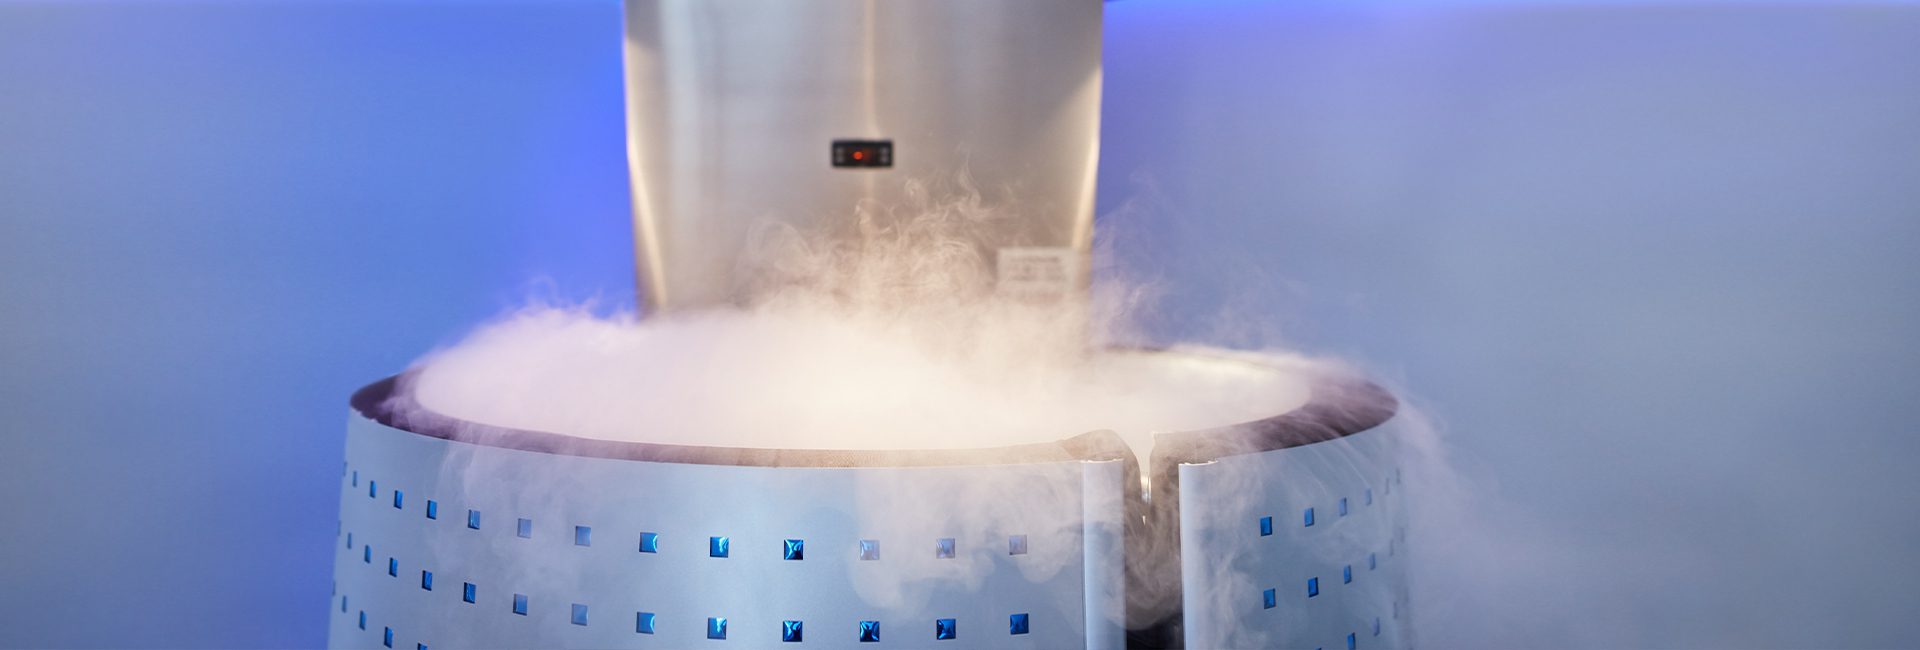 cryotherapy in a Croton gym